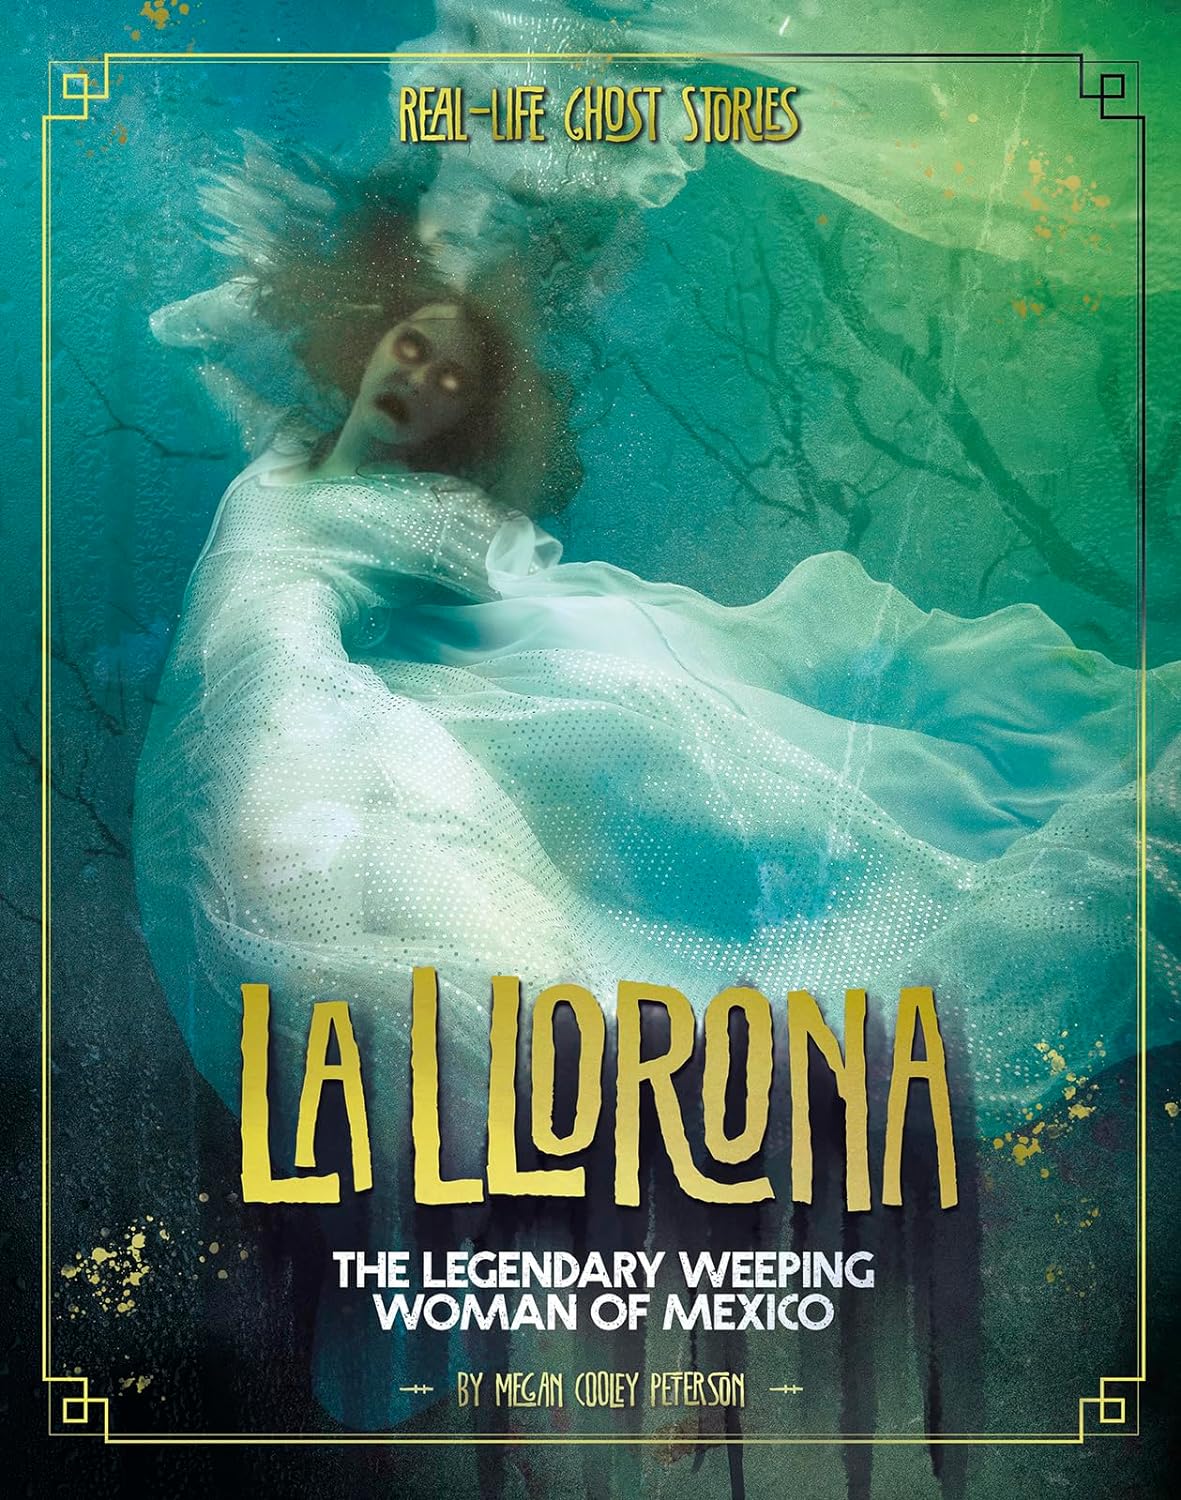 La Llorona: The Legendary Weeping Woman of Mexico (Real-Life Ghost Stories) Library Binding – Illustrated